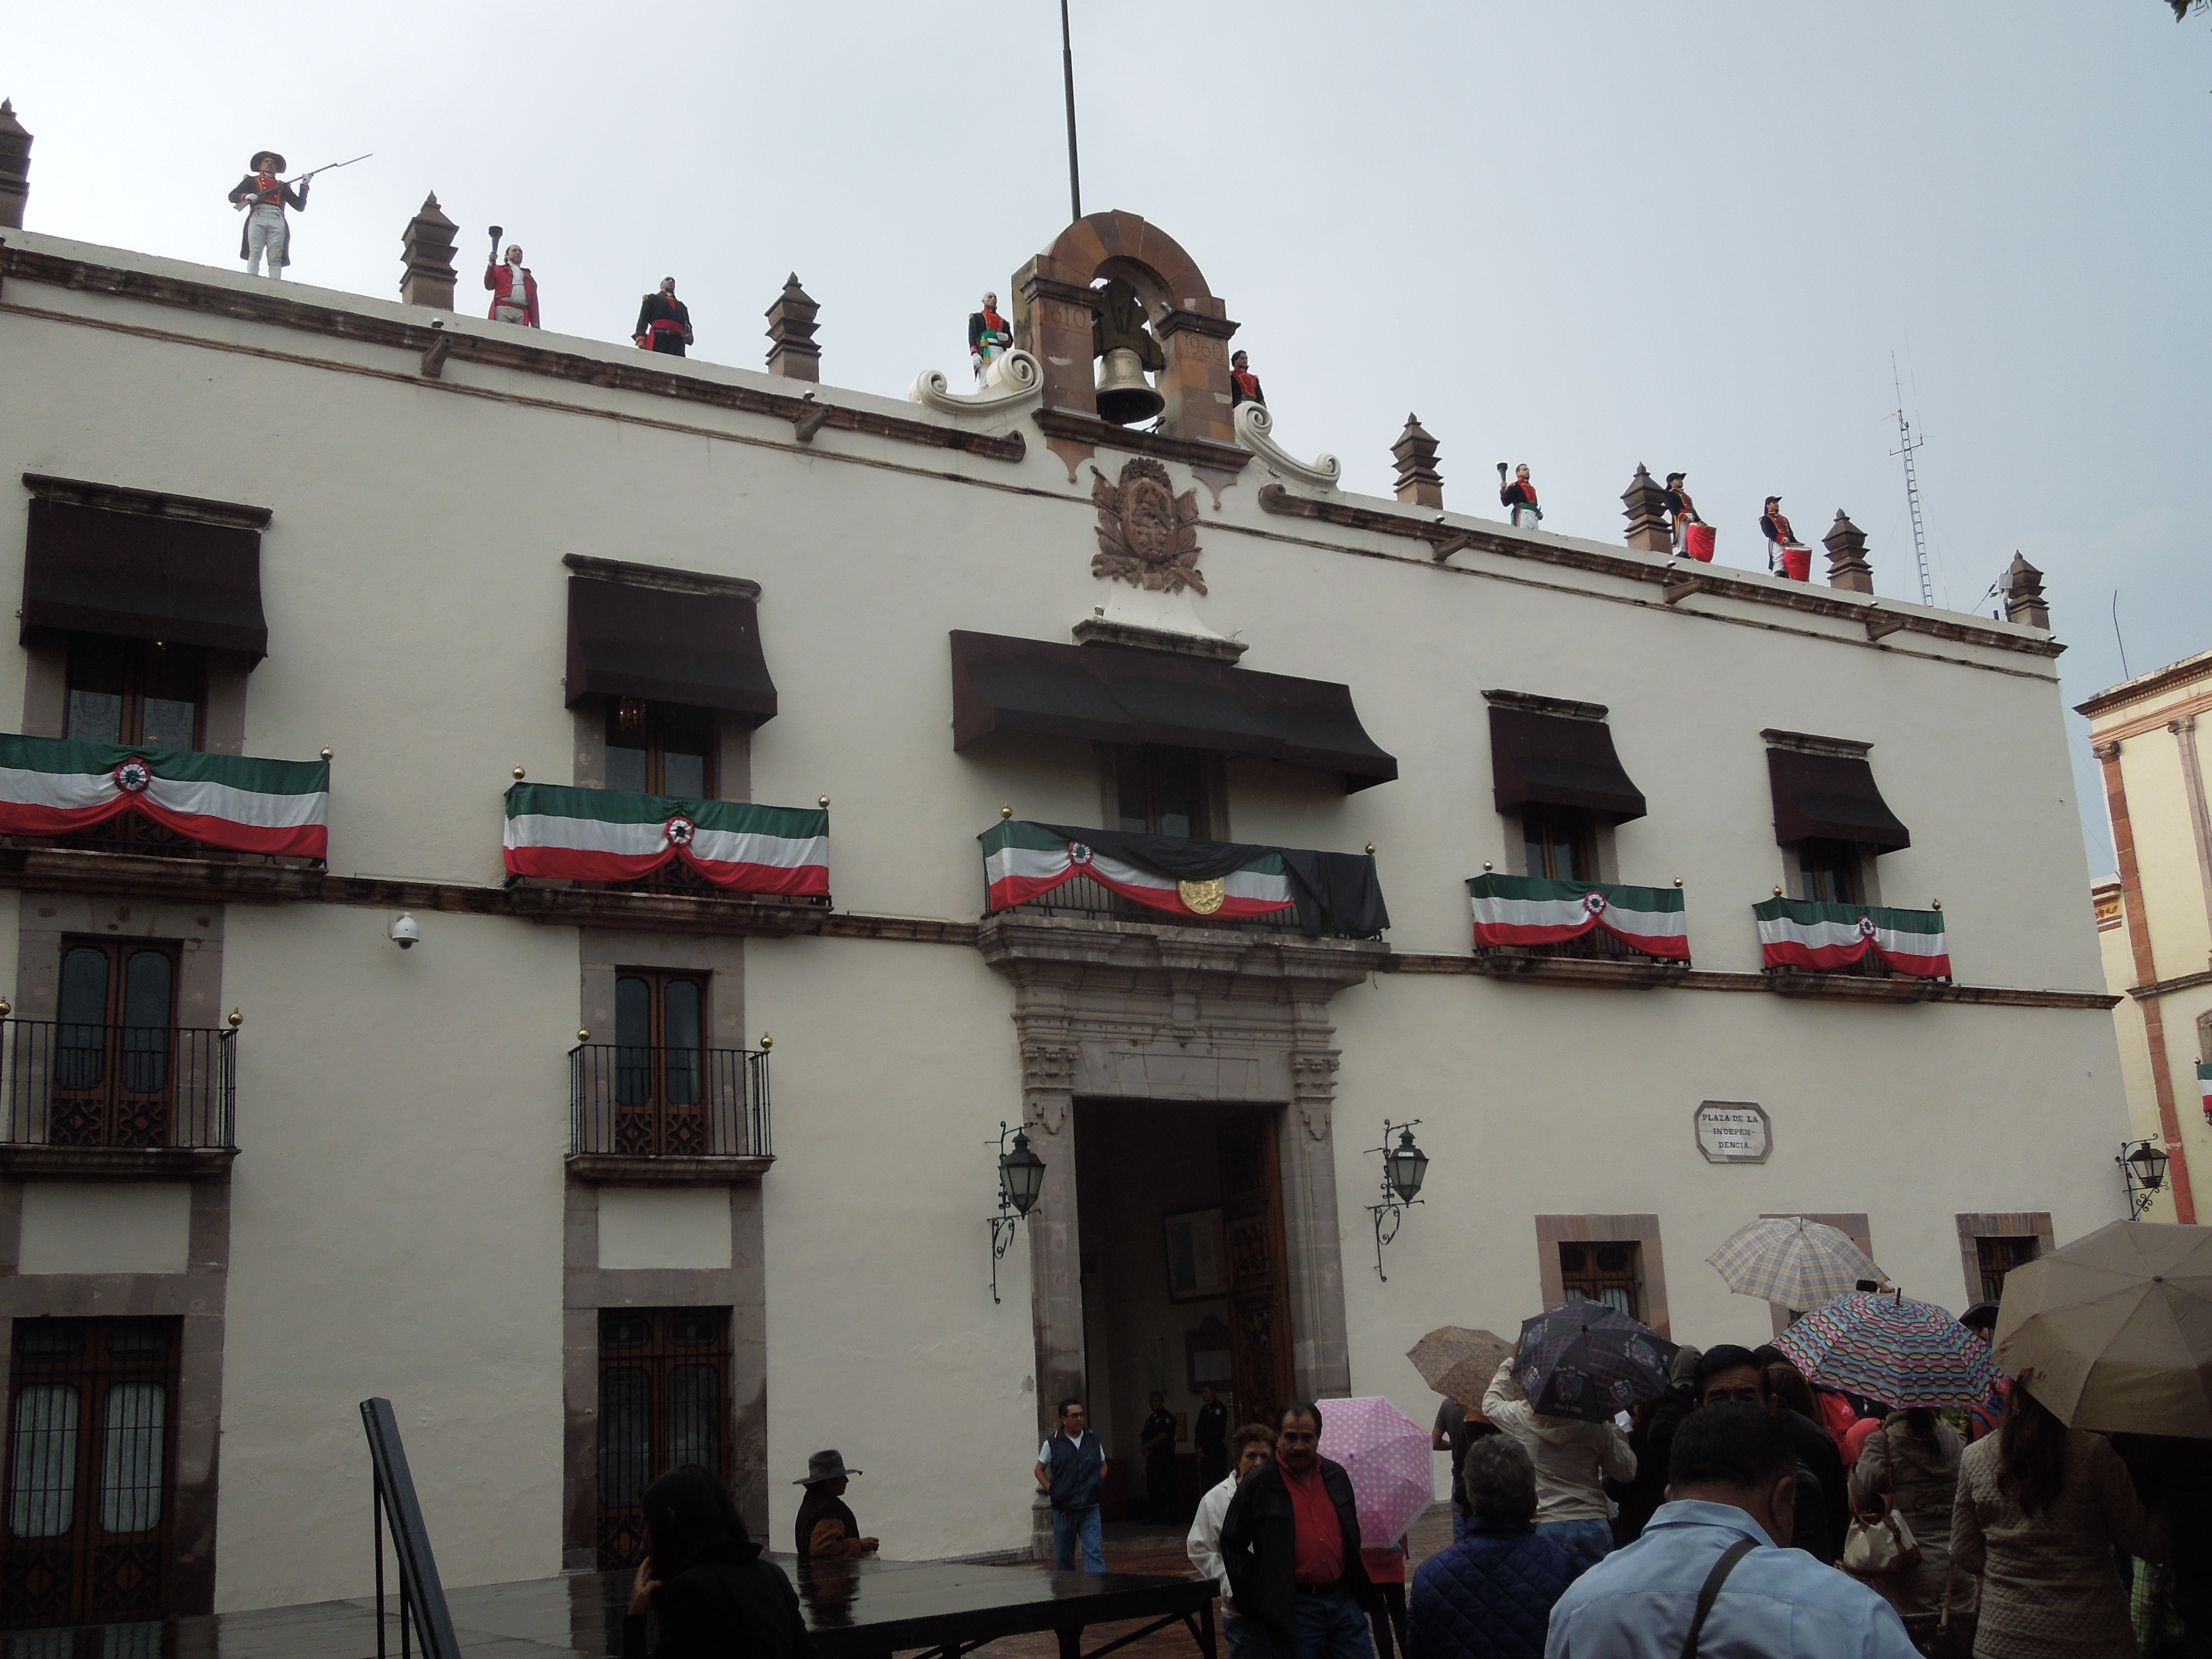 An old government building has balconies adorned with colors of the Mexican flag. A large bell is on the rooftop. Actors stand on top of the building, dressed in contemporary clothing as soldiers, priests, and government figures. 